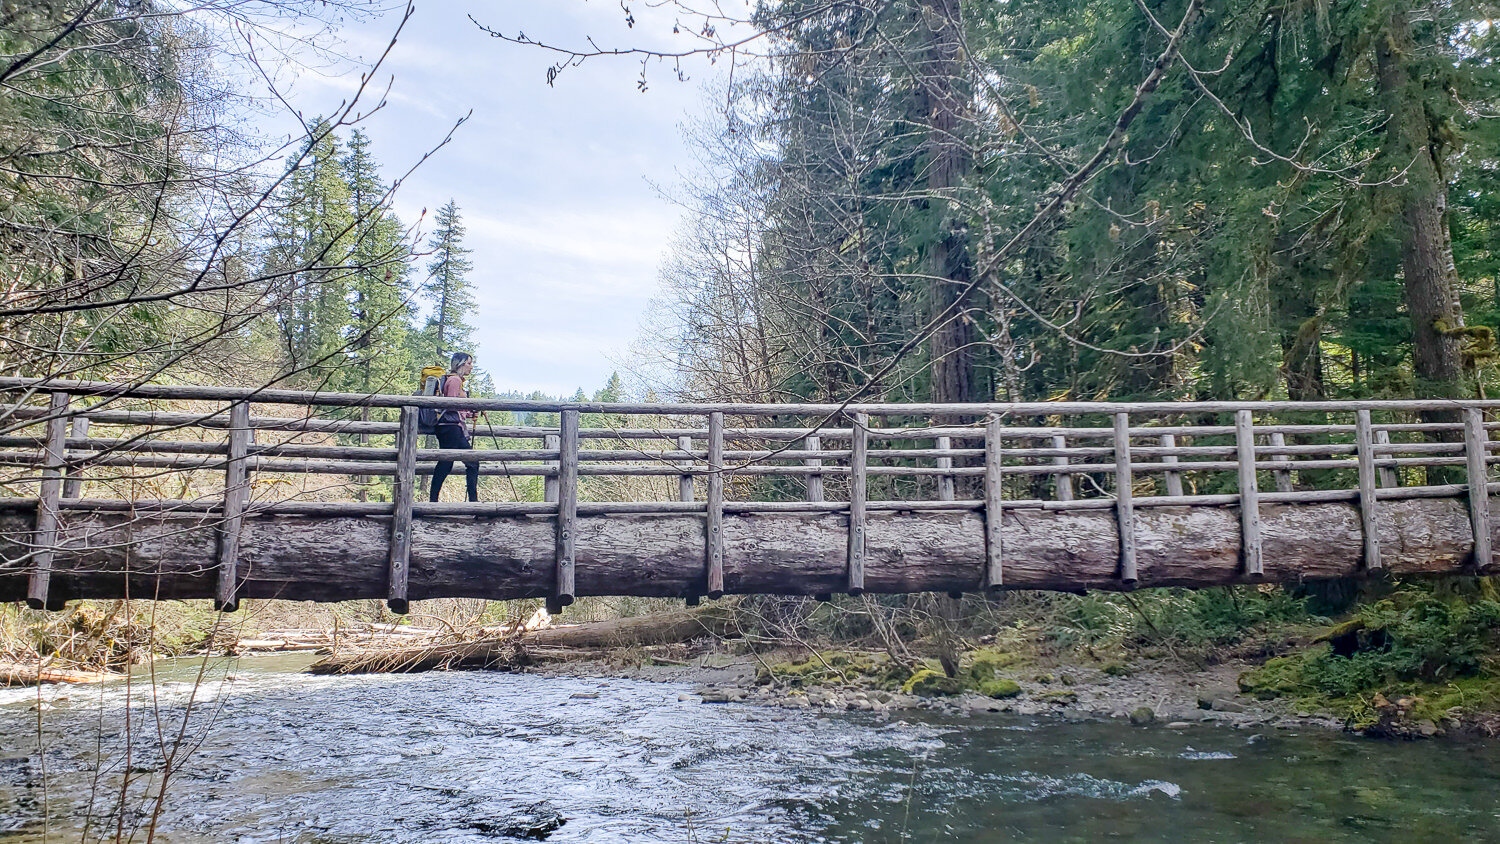 The McKenzie River Trail is a bridge lovers paradise - check out this giant, hand-hewn beauty!